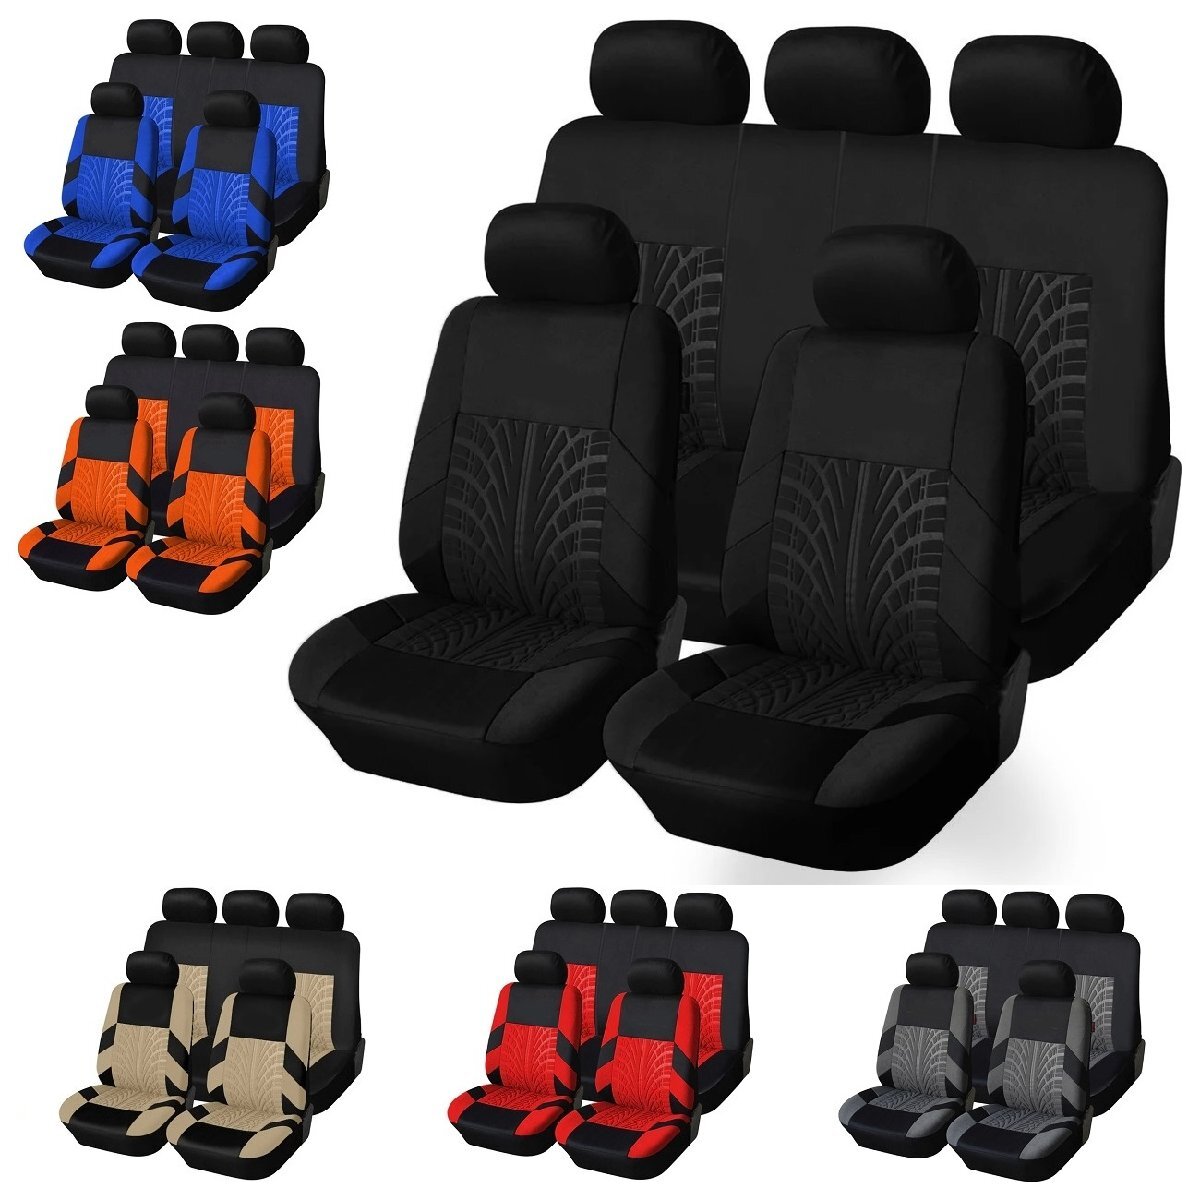  seat cover car Volkswagen The * Beetle driver`s seat passenger's seat after part seat rom and rear (before and after) 2 row set is possible to choose 6 color AUTOYOUTH NL